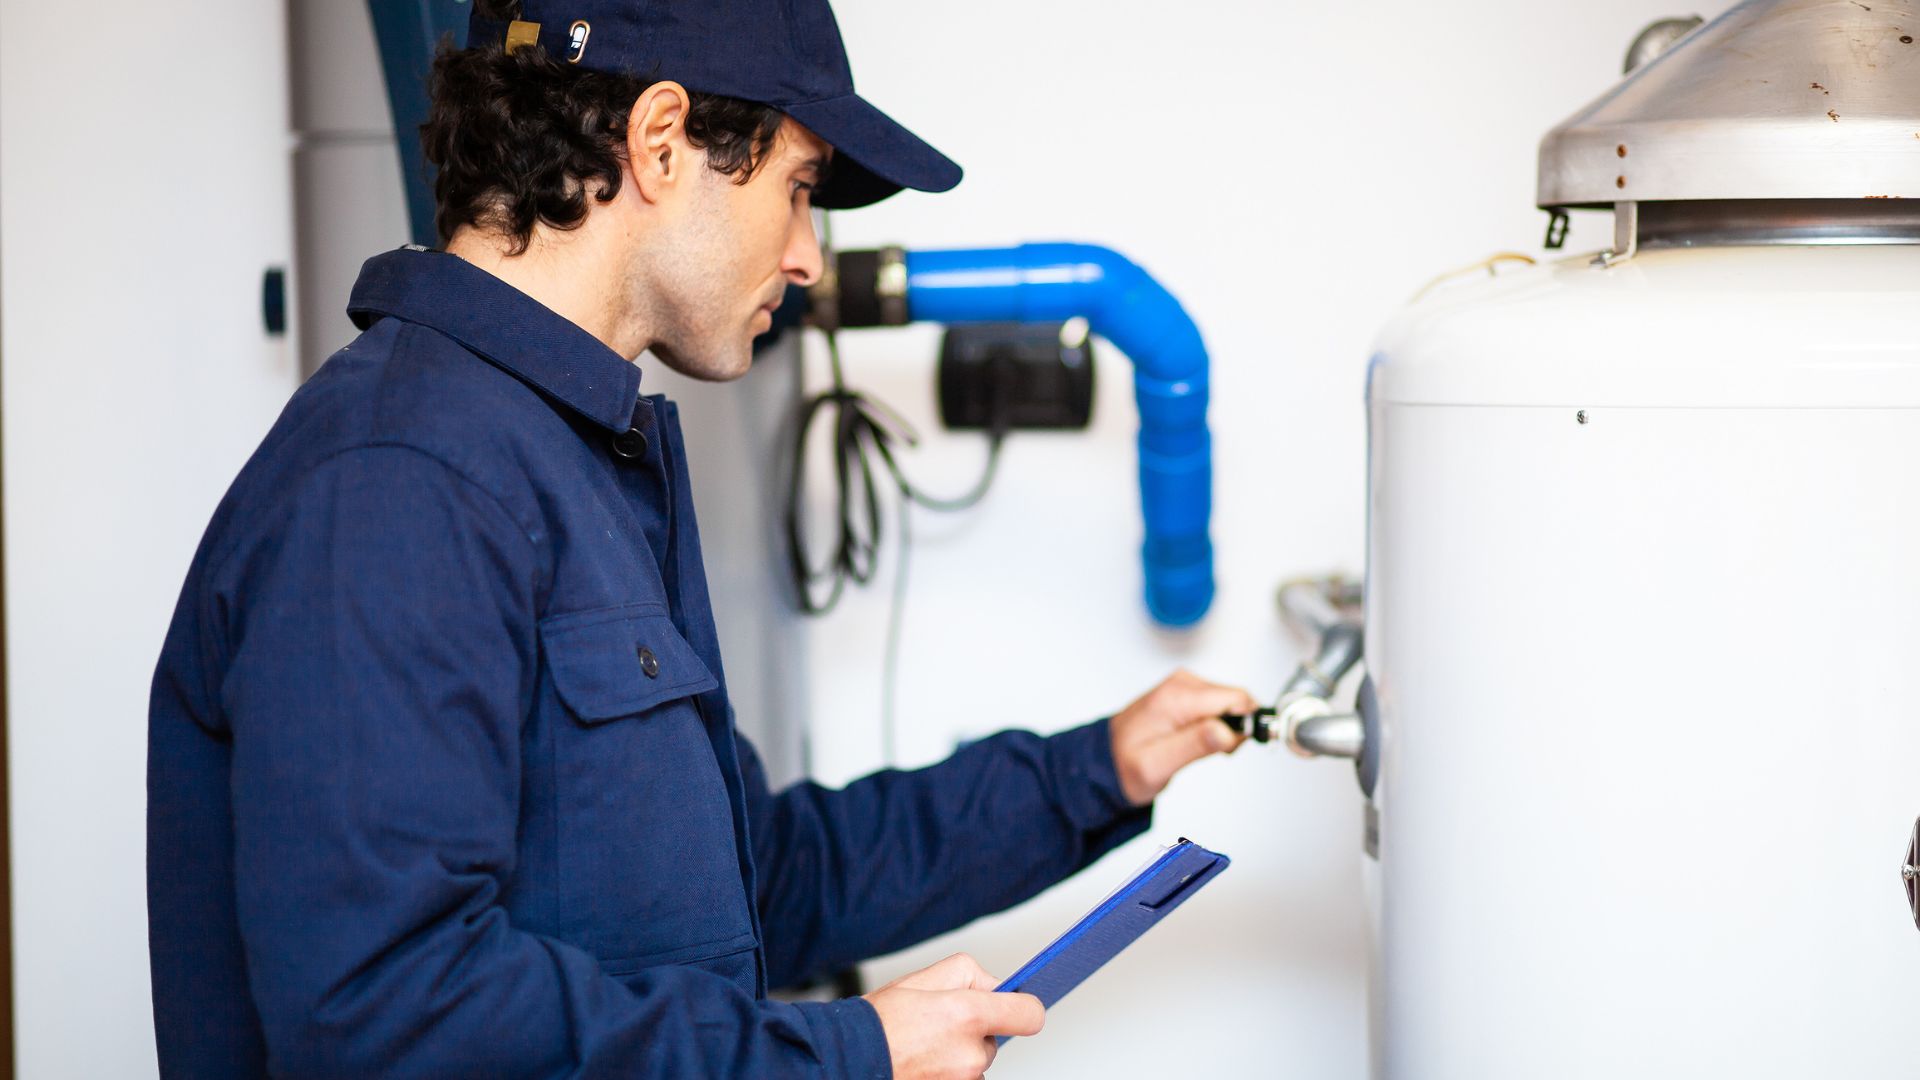 Upgrade your hot water system with seamless replacements of tankless units, expertly executed by our team of plumbers.